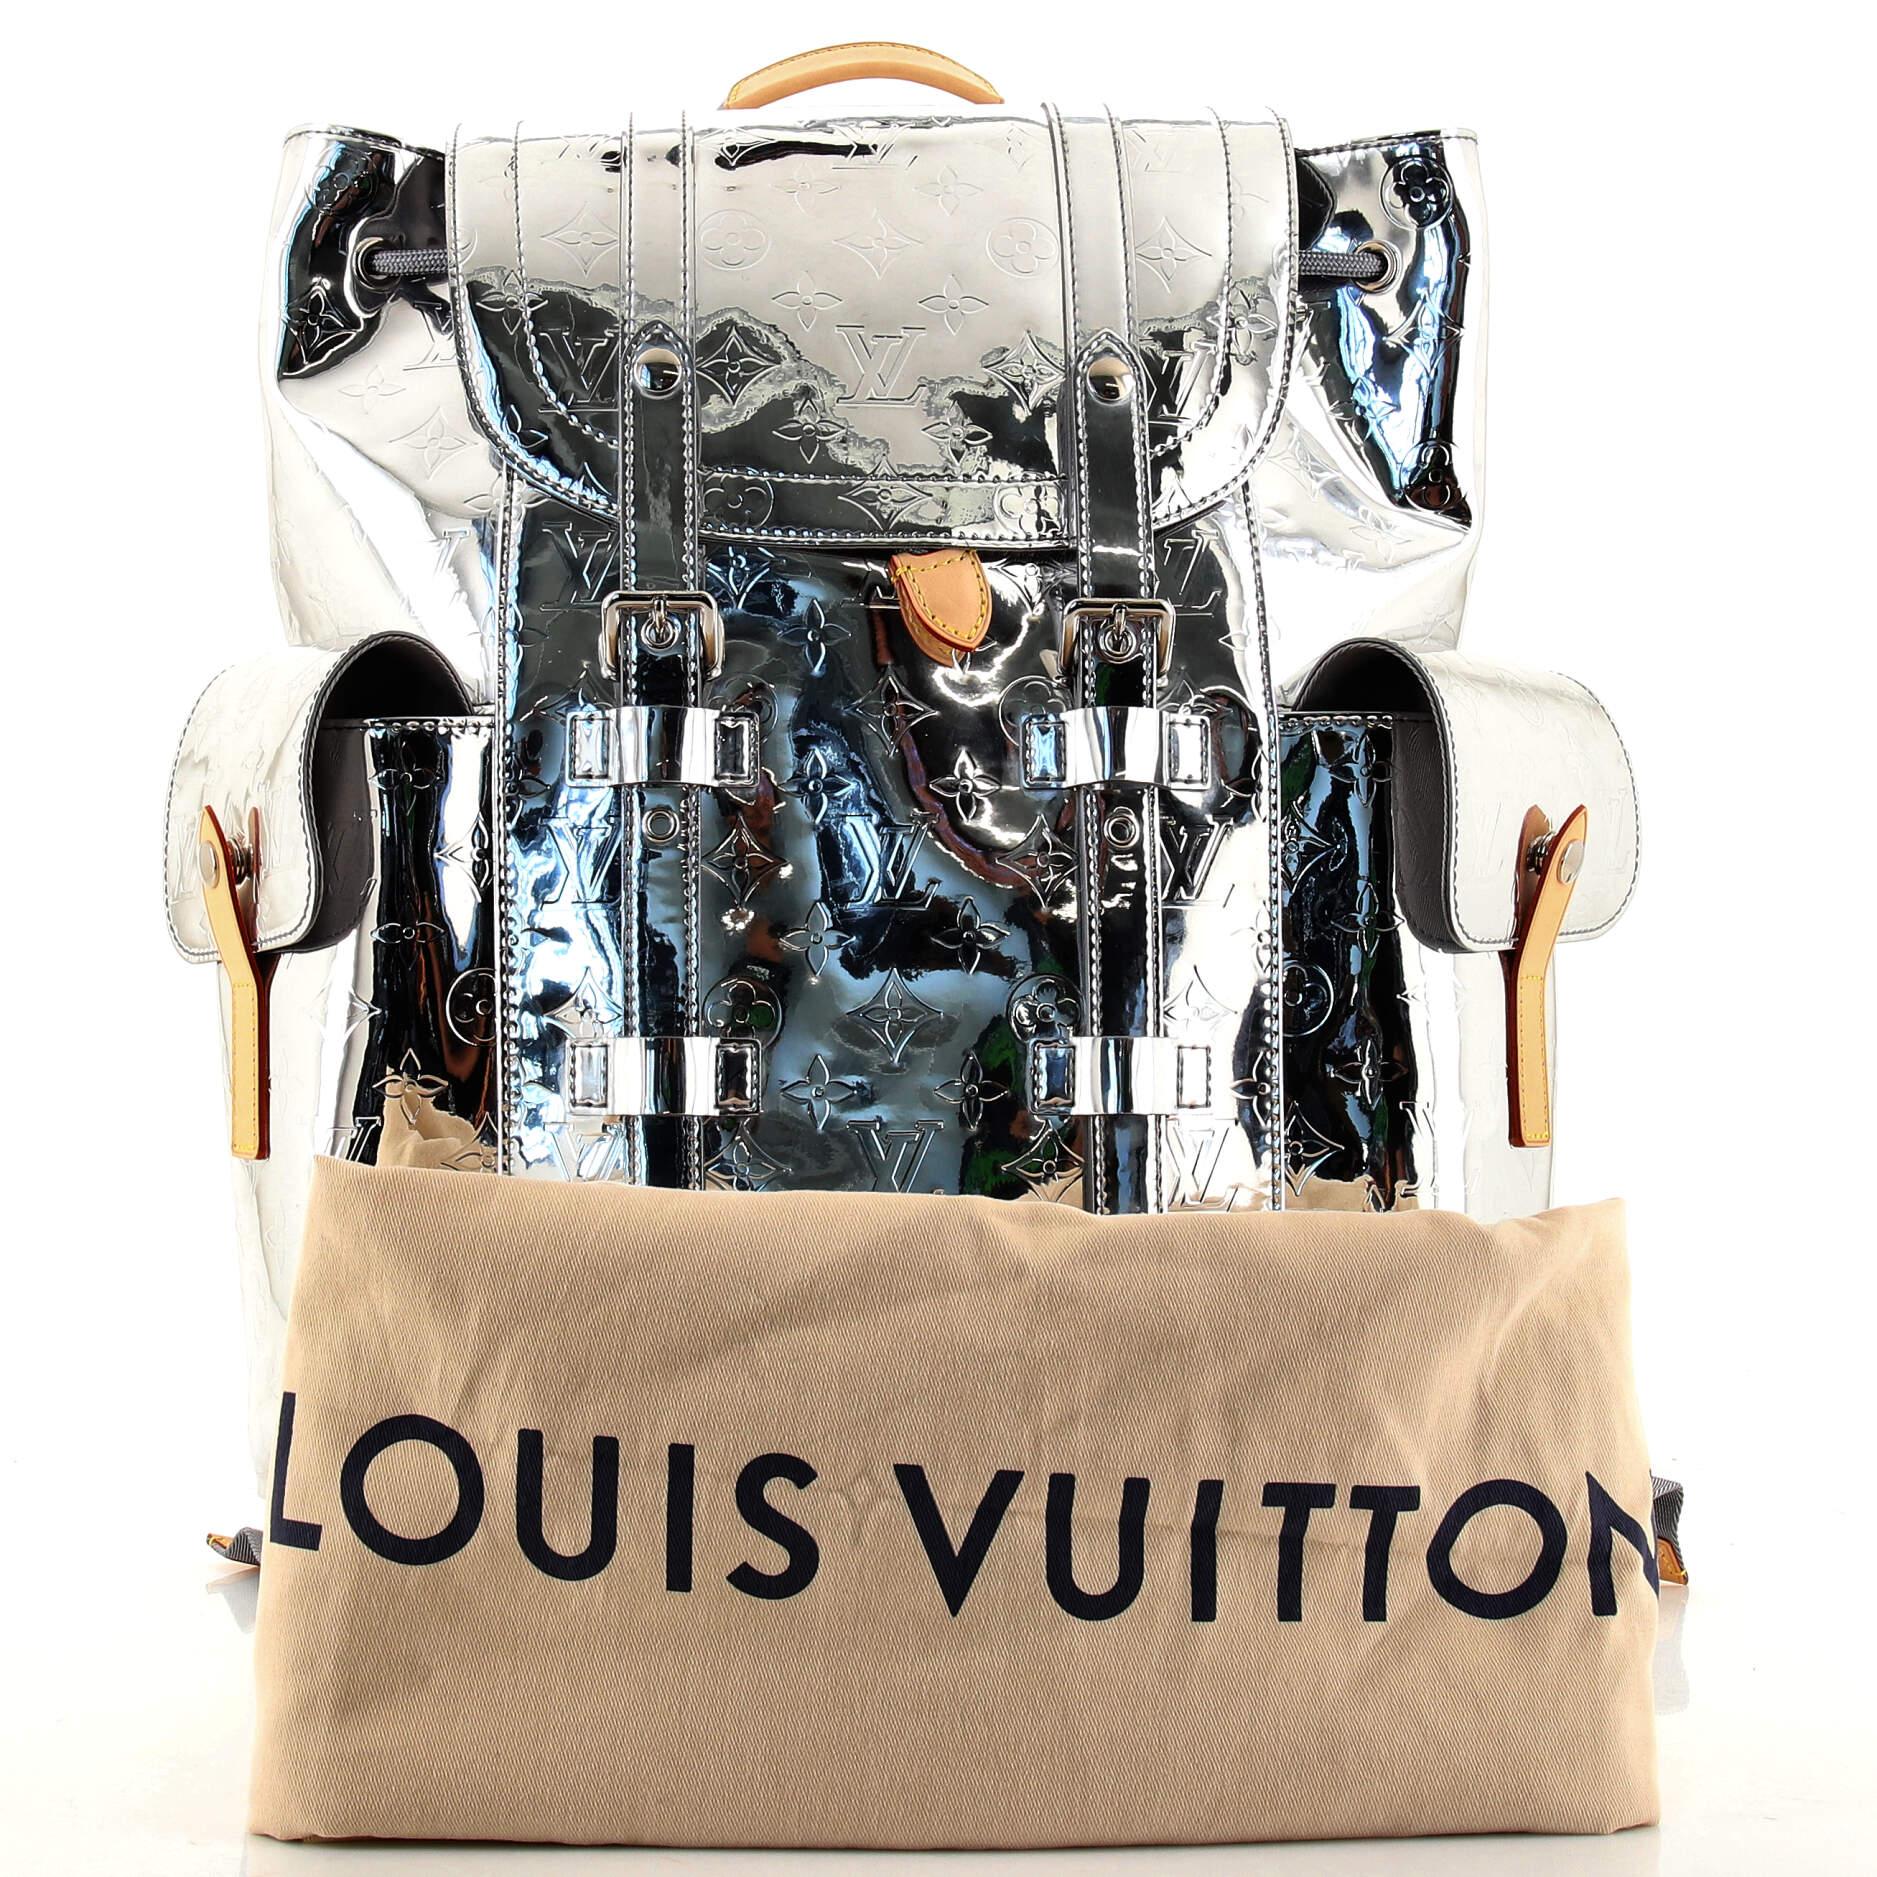 Louis Vuitton Christopher - 12 For Sale on 1stDibs  louis vuitton  christopher messenger bag, louis vuitton christopher mm price, christopher  backpack lv